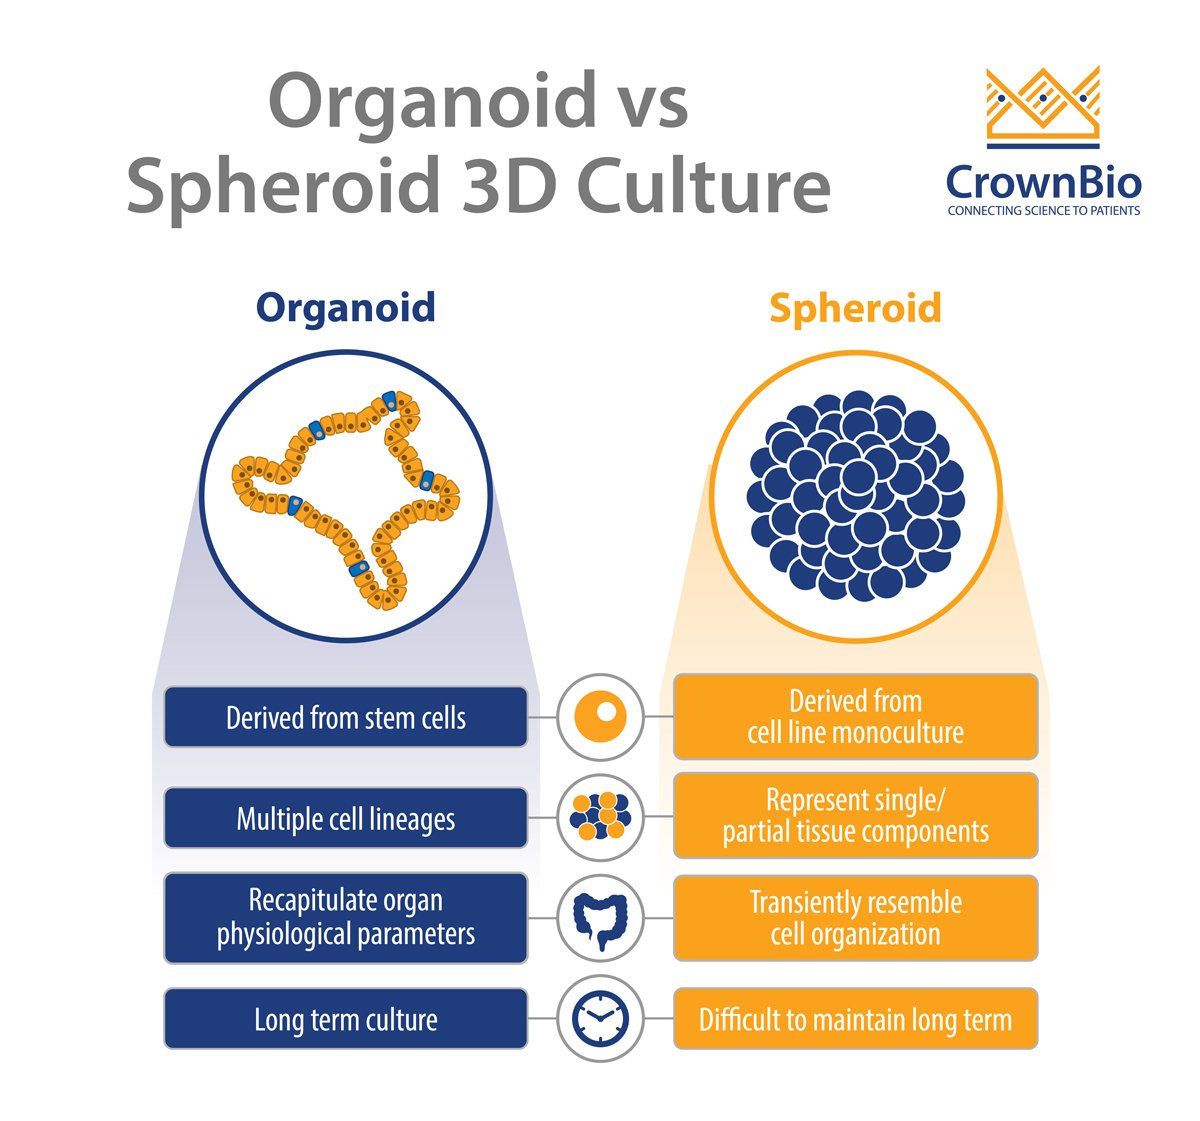 How are Organoids Different from Spheroids?